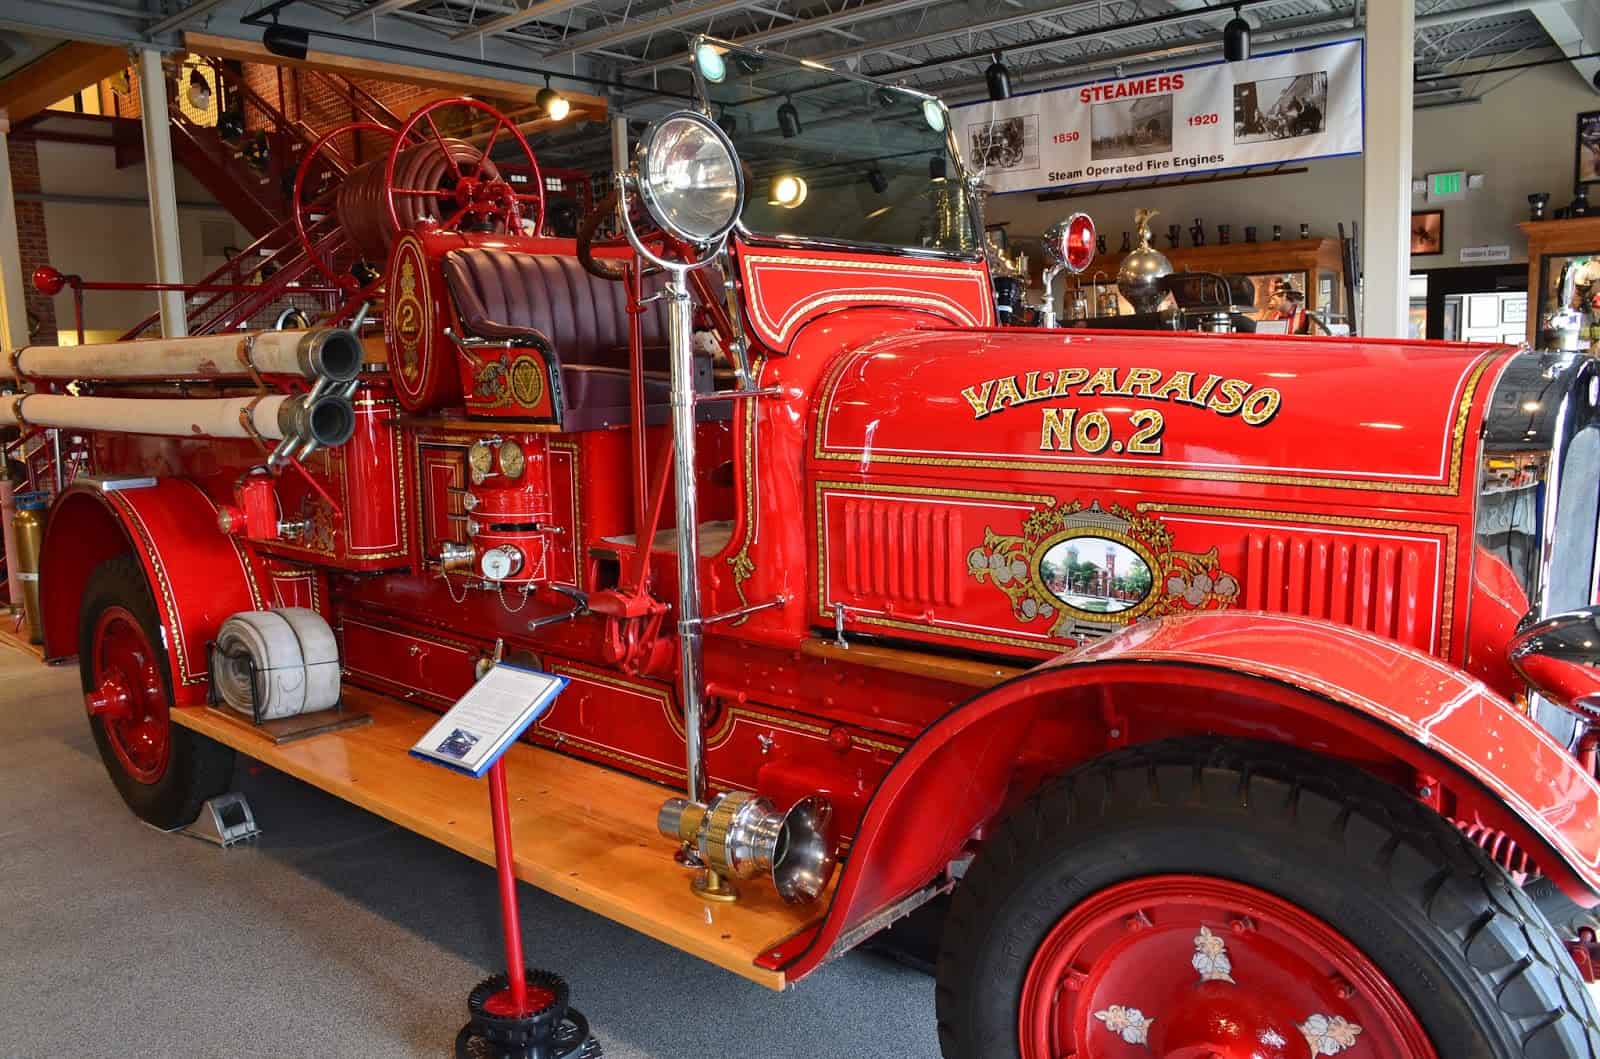 1923 Seagrave Engine at the Valparaiso Fire Museum in Valparaiso, Indiana